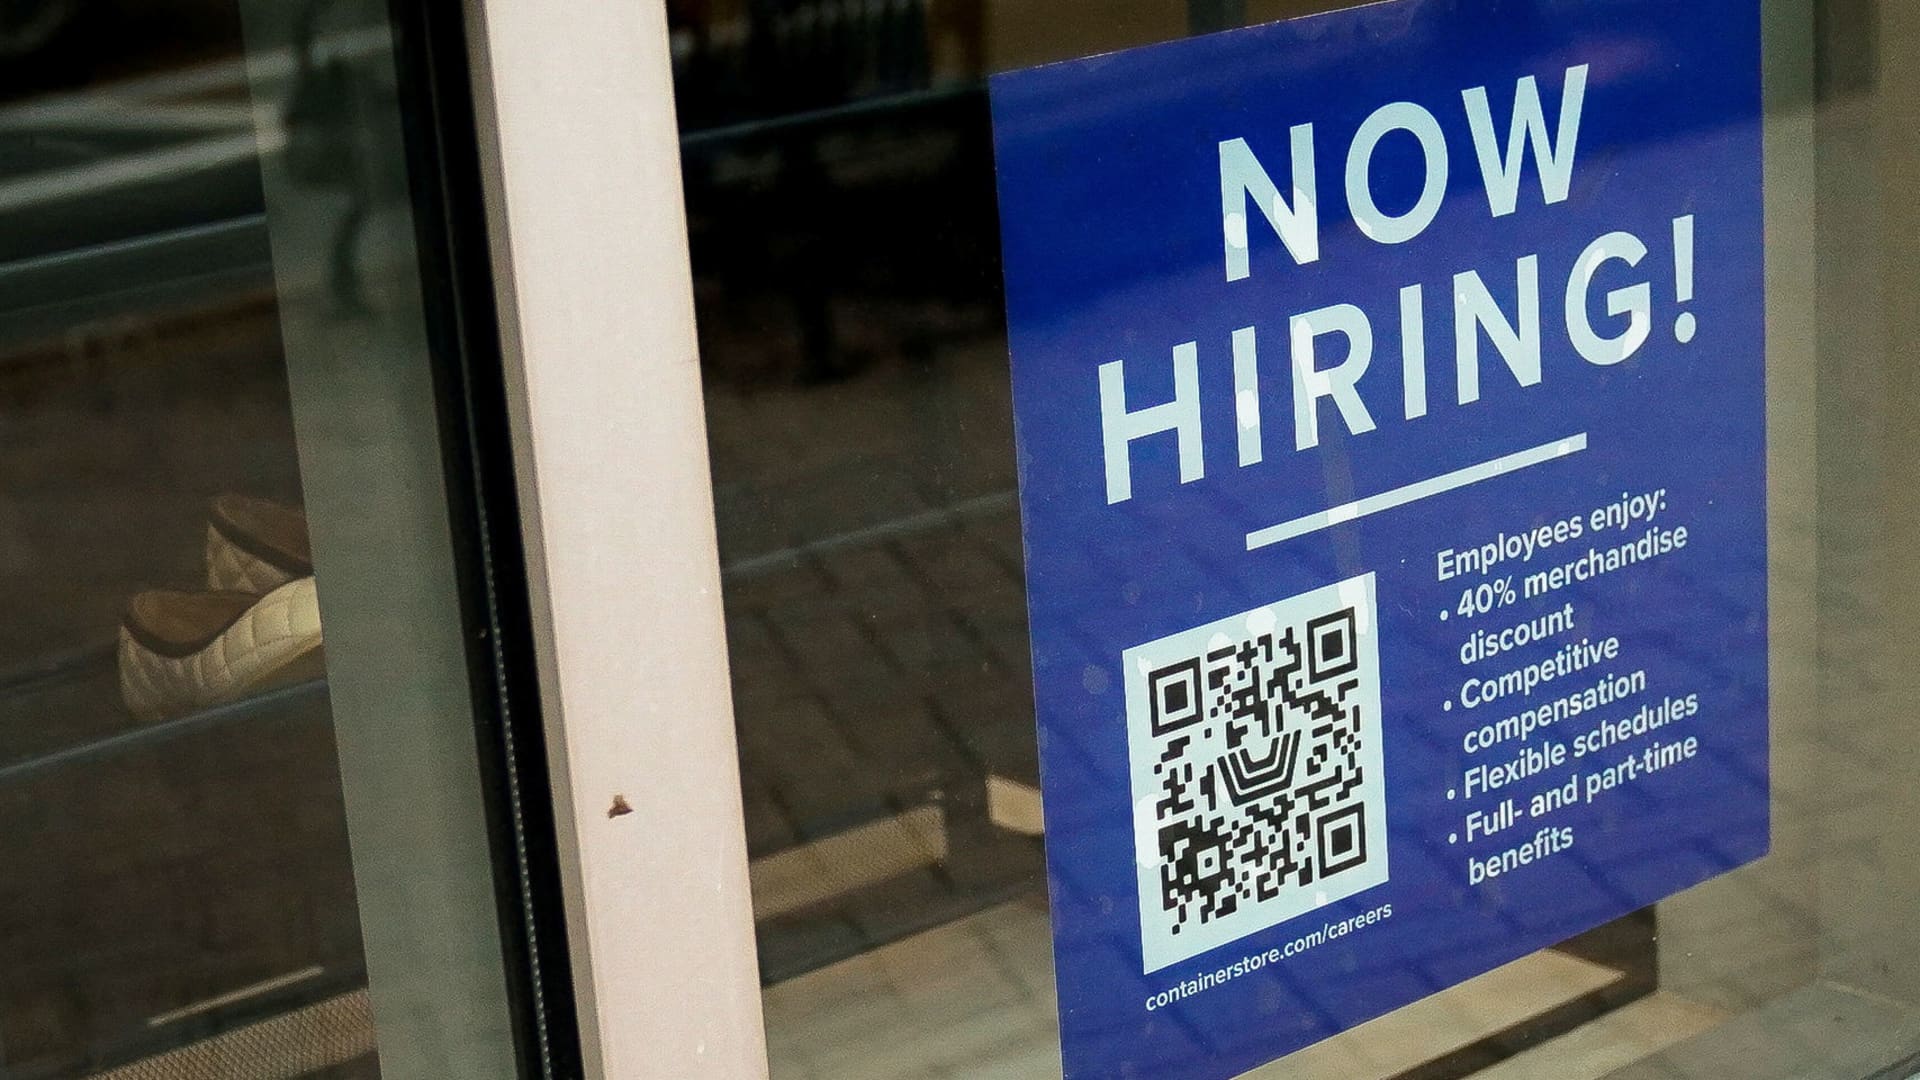 March job openings drop exceeded expectations.